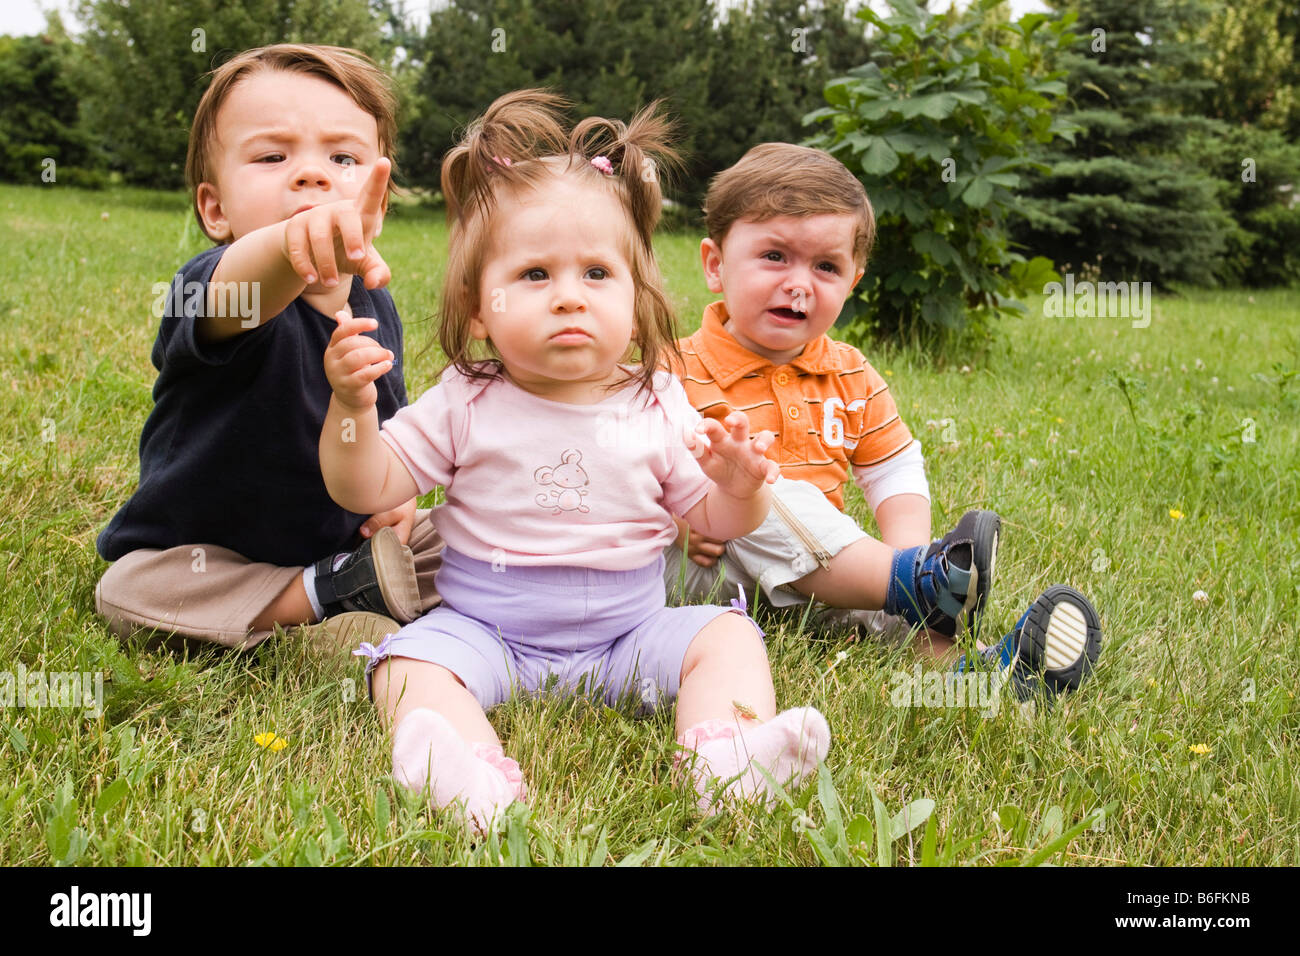 Three babies, 1 year, 8 months and 10 months, sitting on grass Stock Photo